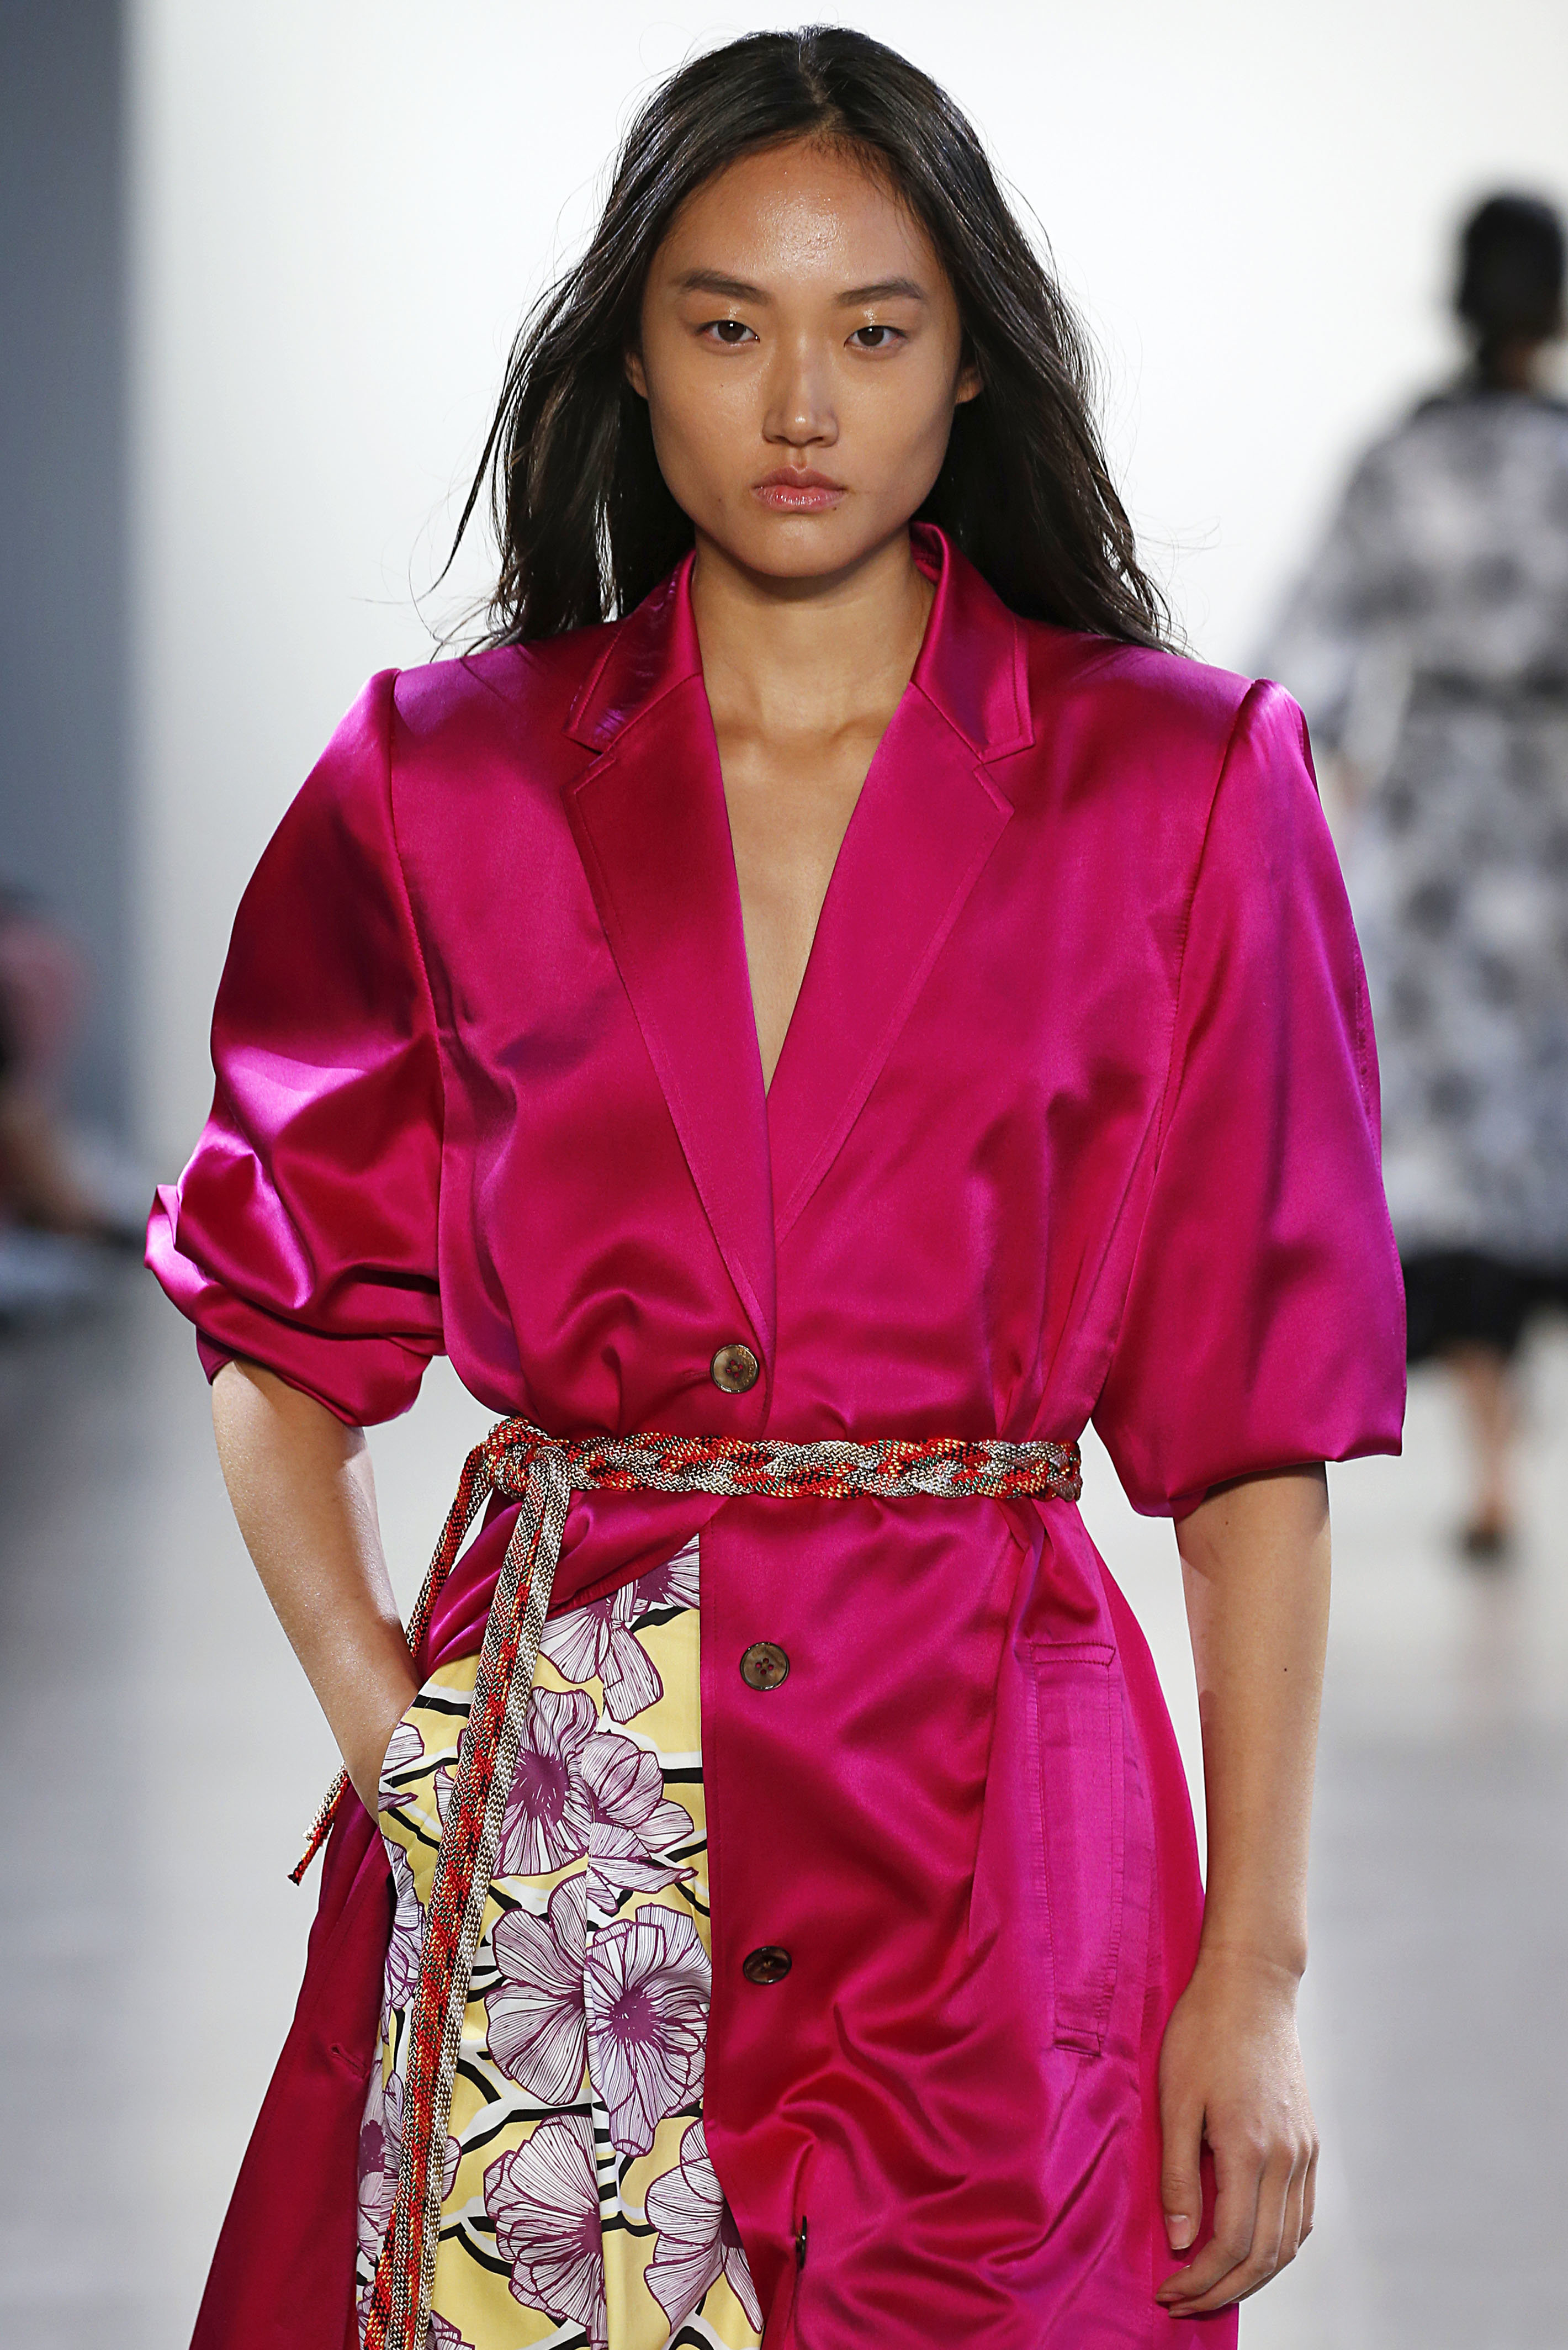 Designer Casts All Asian Models For New York Fashion Week Show | HuffPost